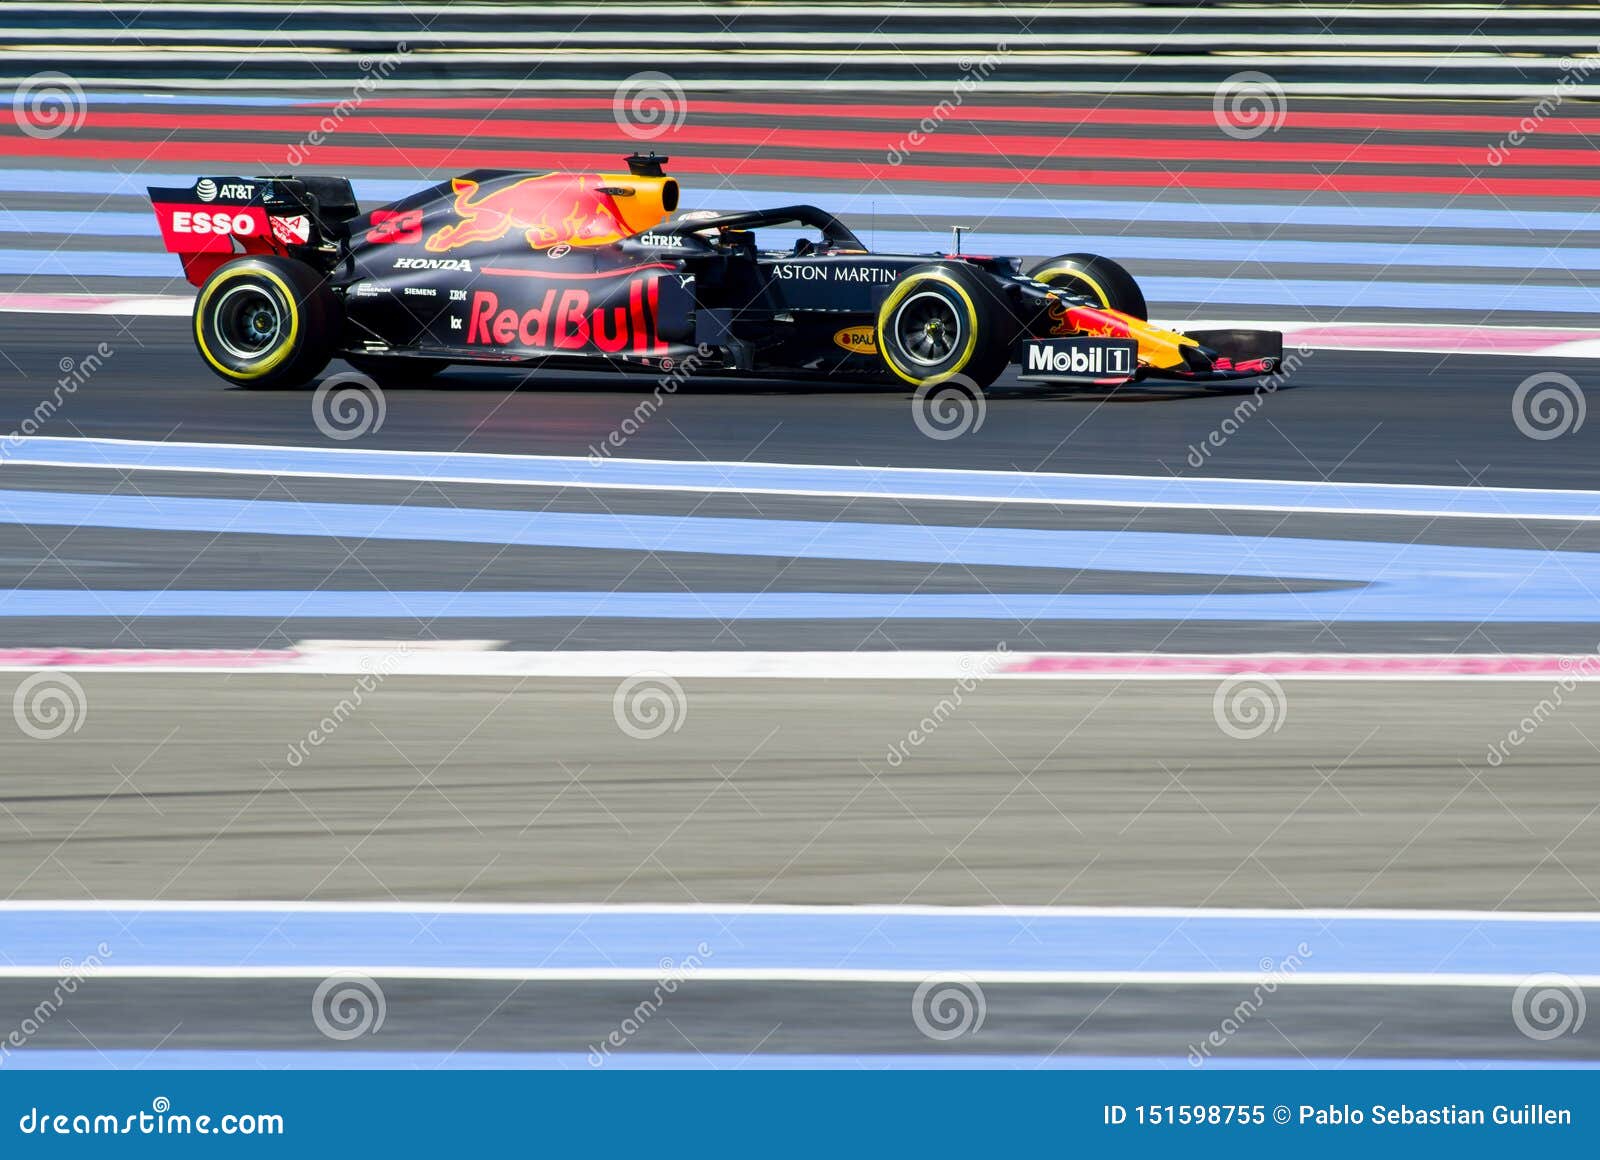 Formula One French Grand Prix 2019 Image - Image of sporting, castellet: 151598755